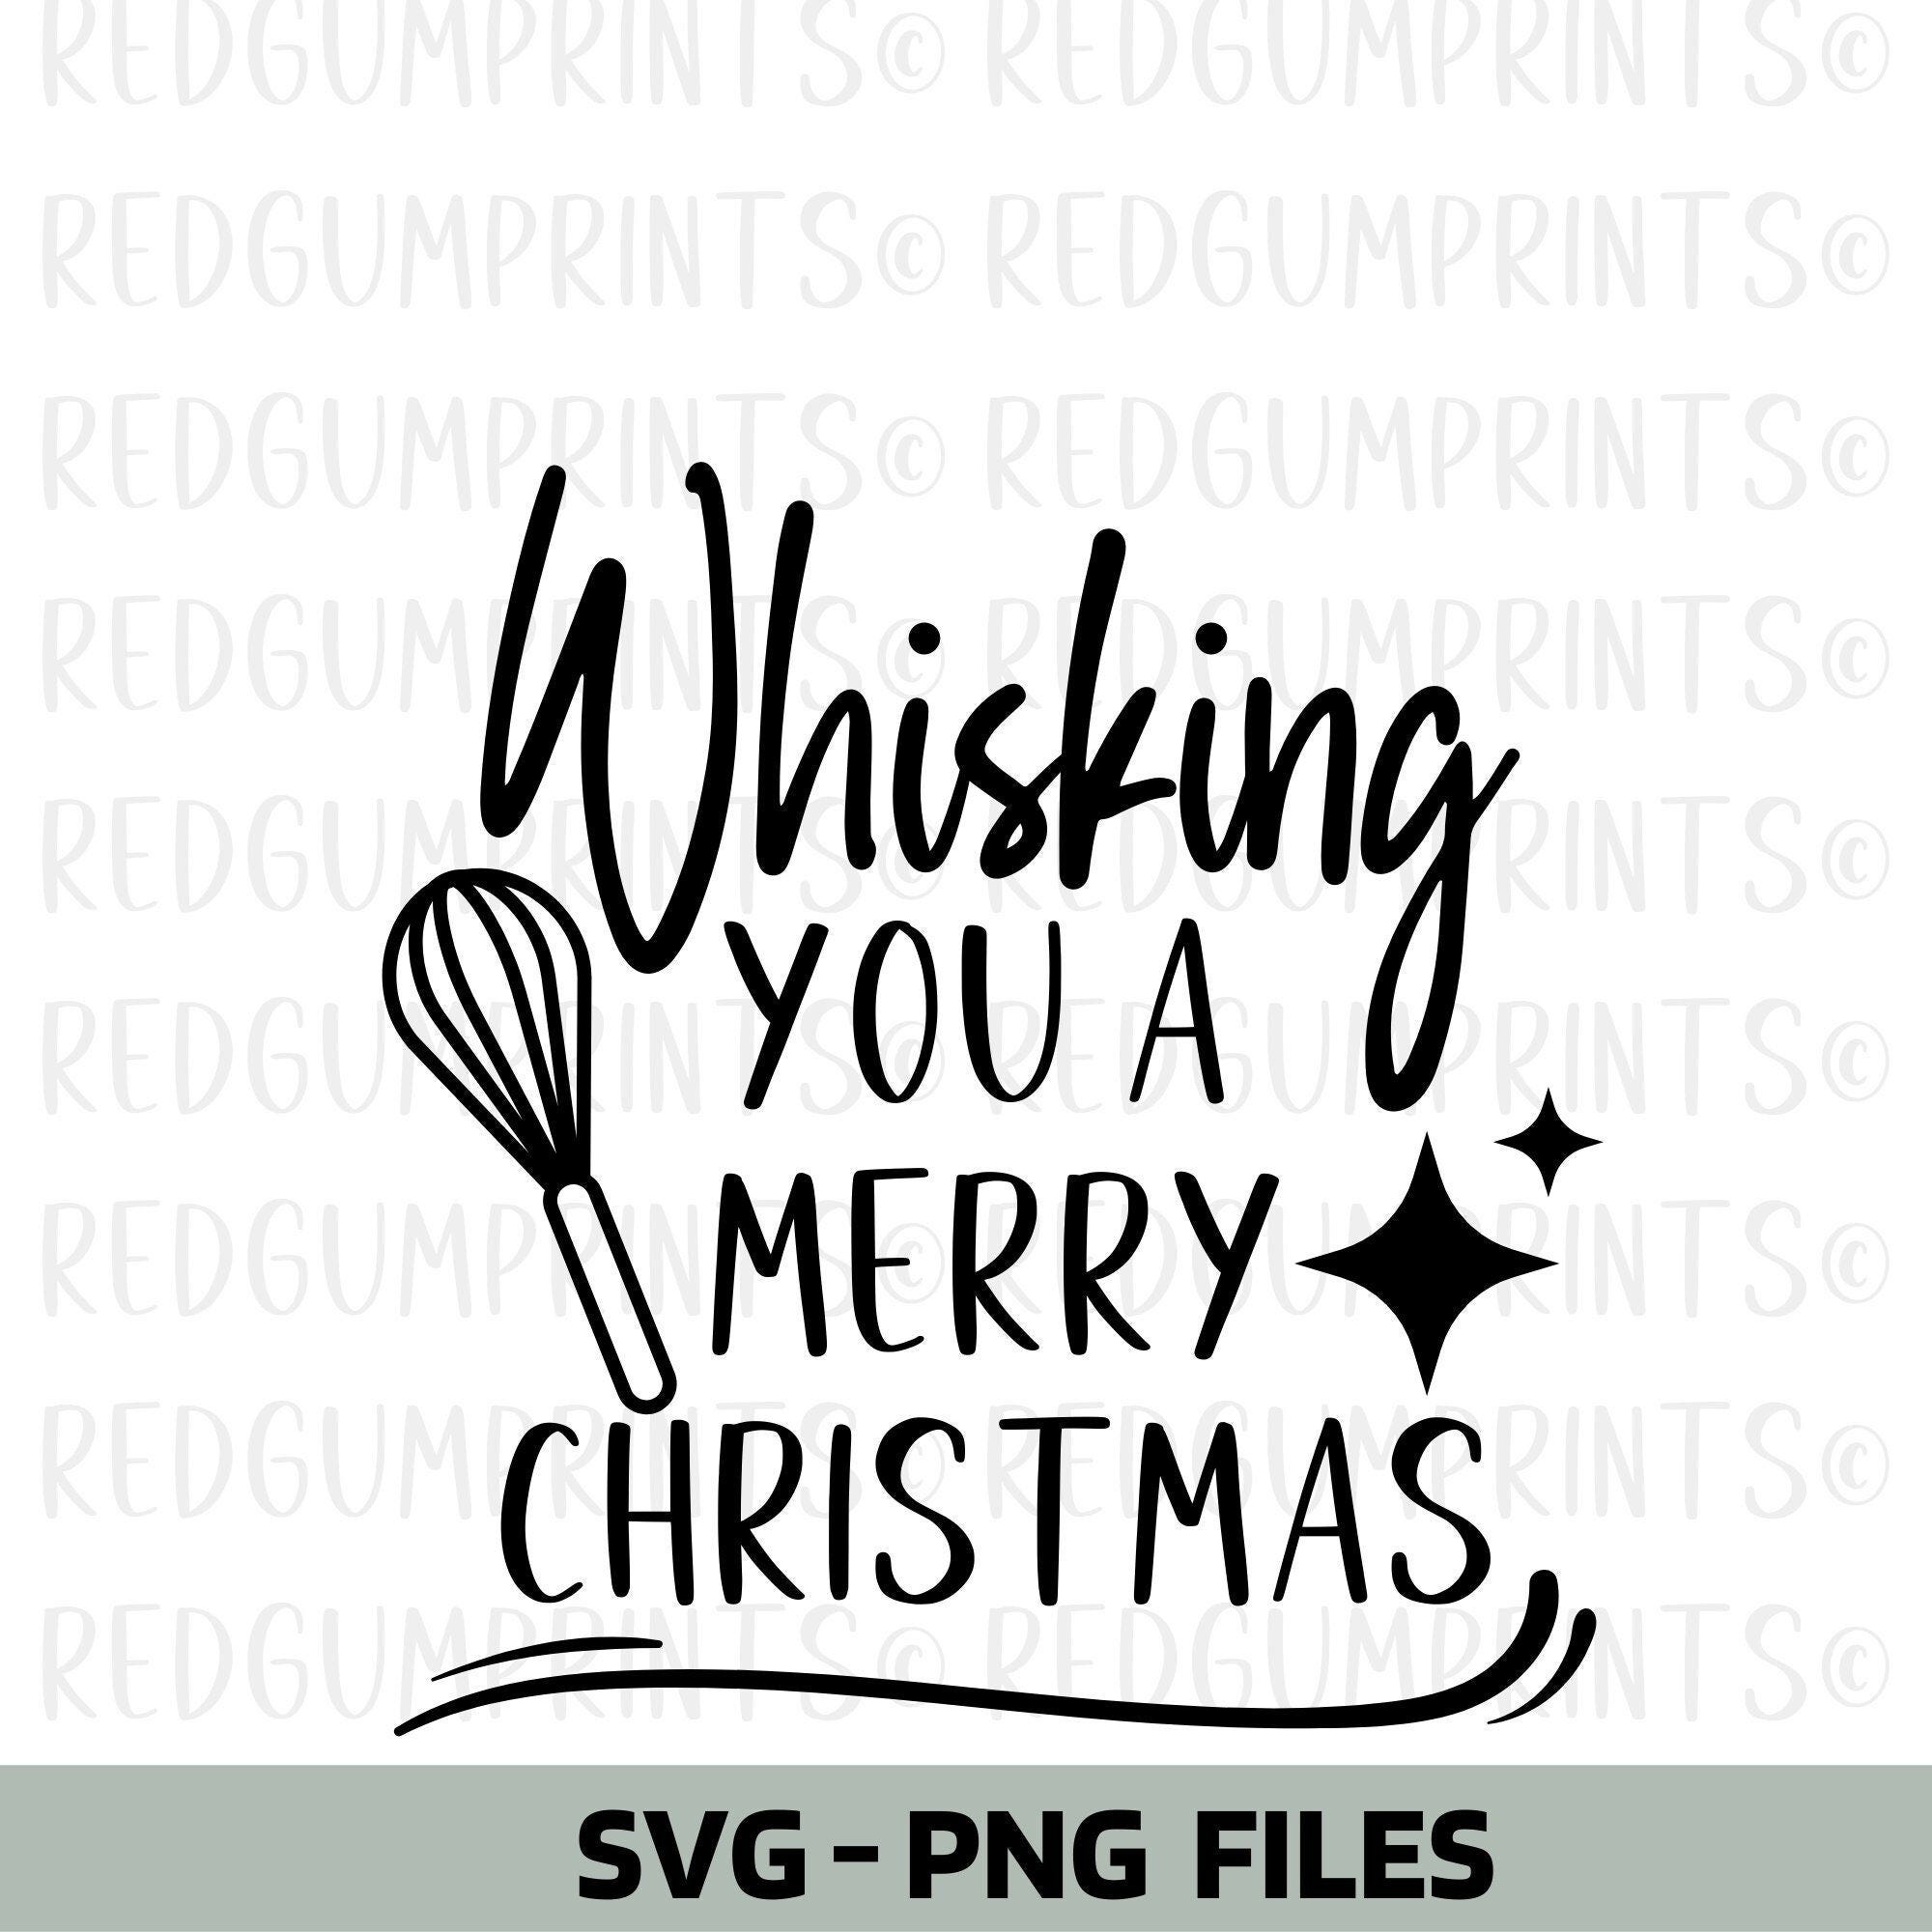 Whisking You A Merry Christmas SVG, Cricut Cut Files, Funny Christmas, Cricut, Christmas svg, Digital Download, Silhouette, PNG, SVG, Baking